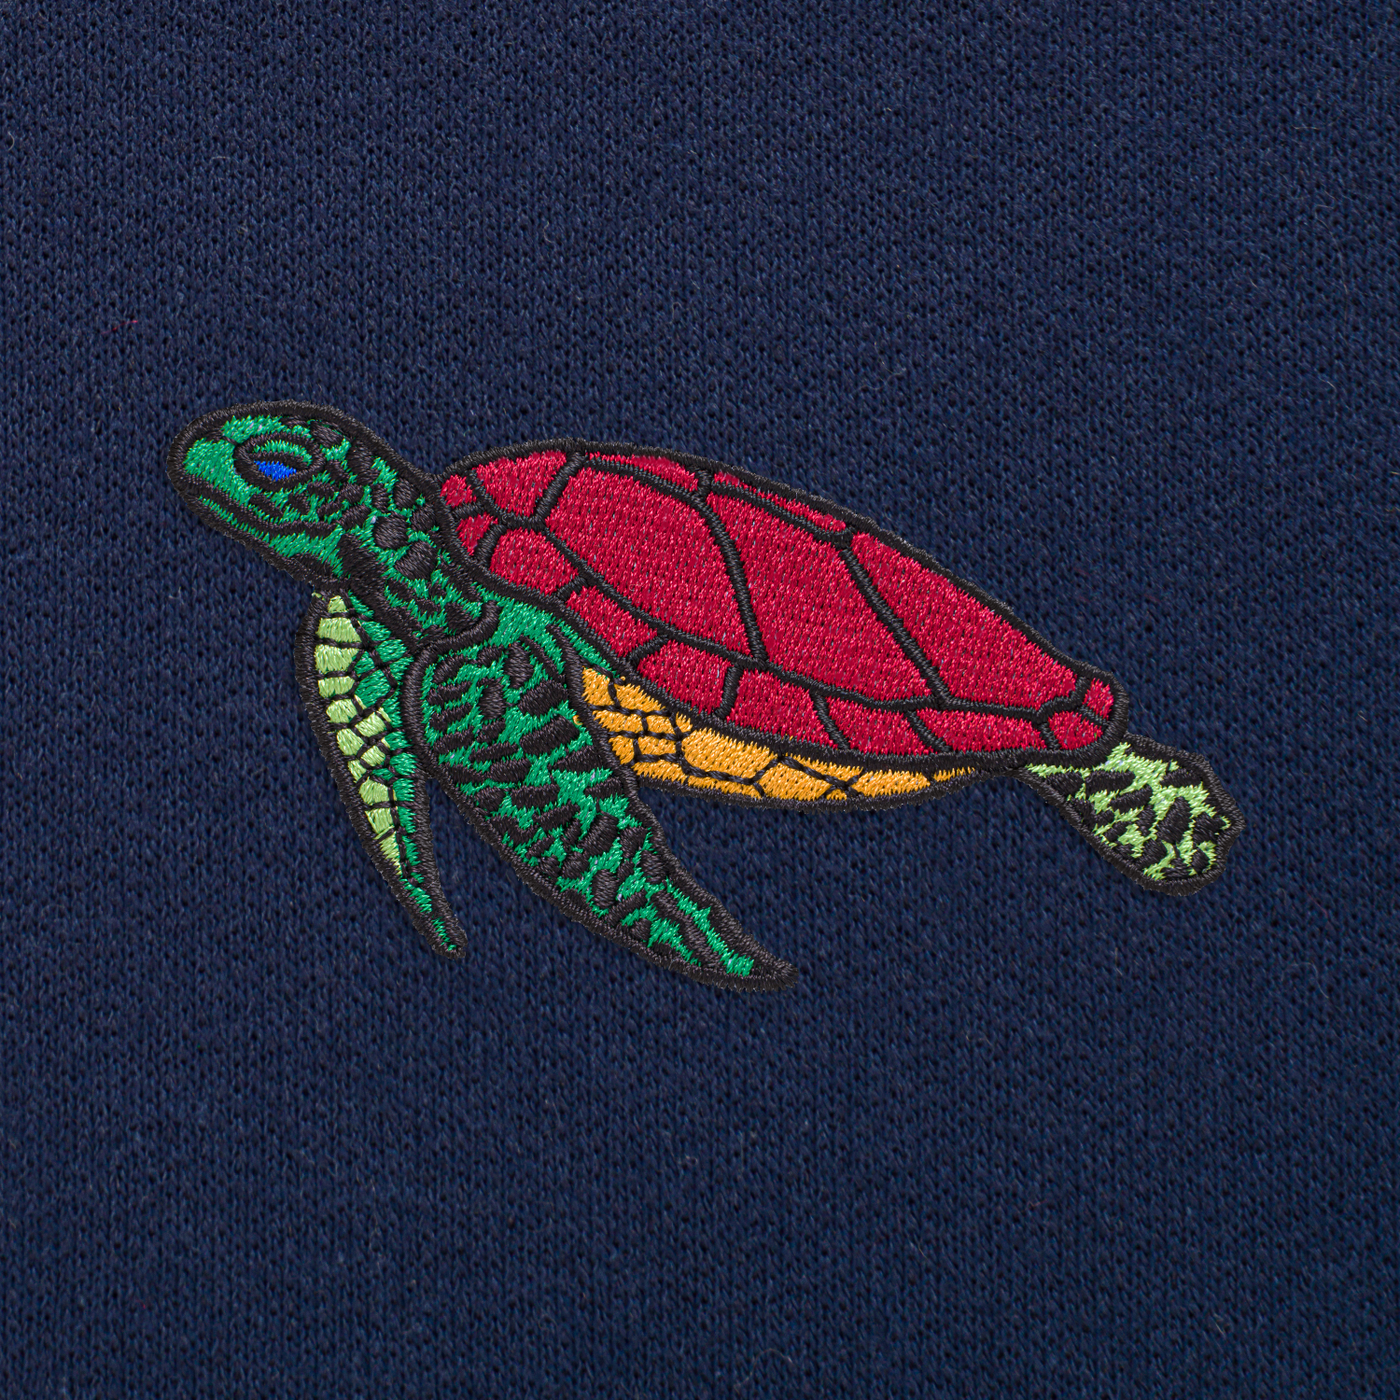 Bobby's Planet Unisex Embroidered Sea Turtle Joggers from Seven Seas Fish Animals Collection in Navy Color#color_navy